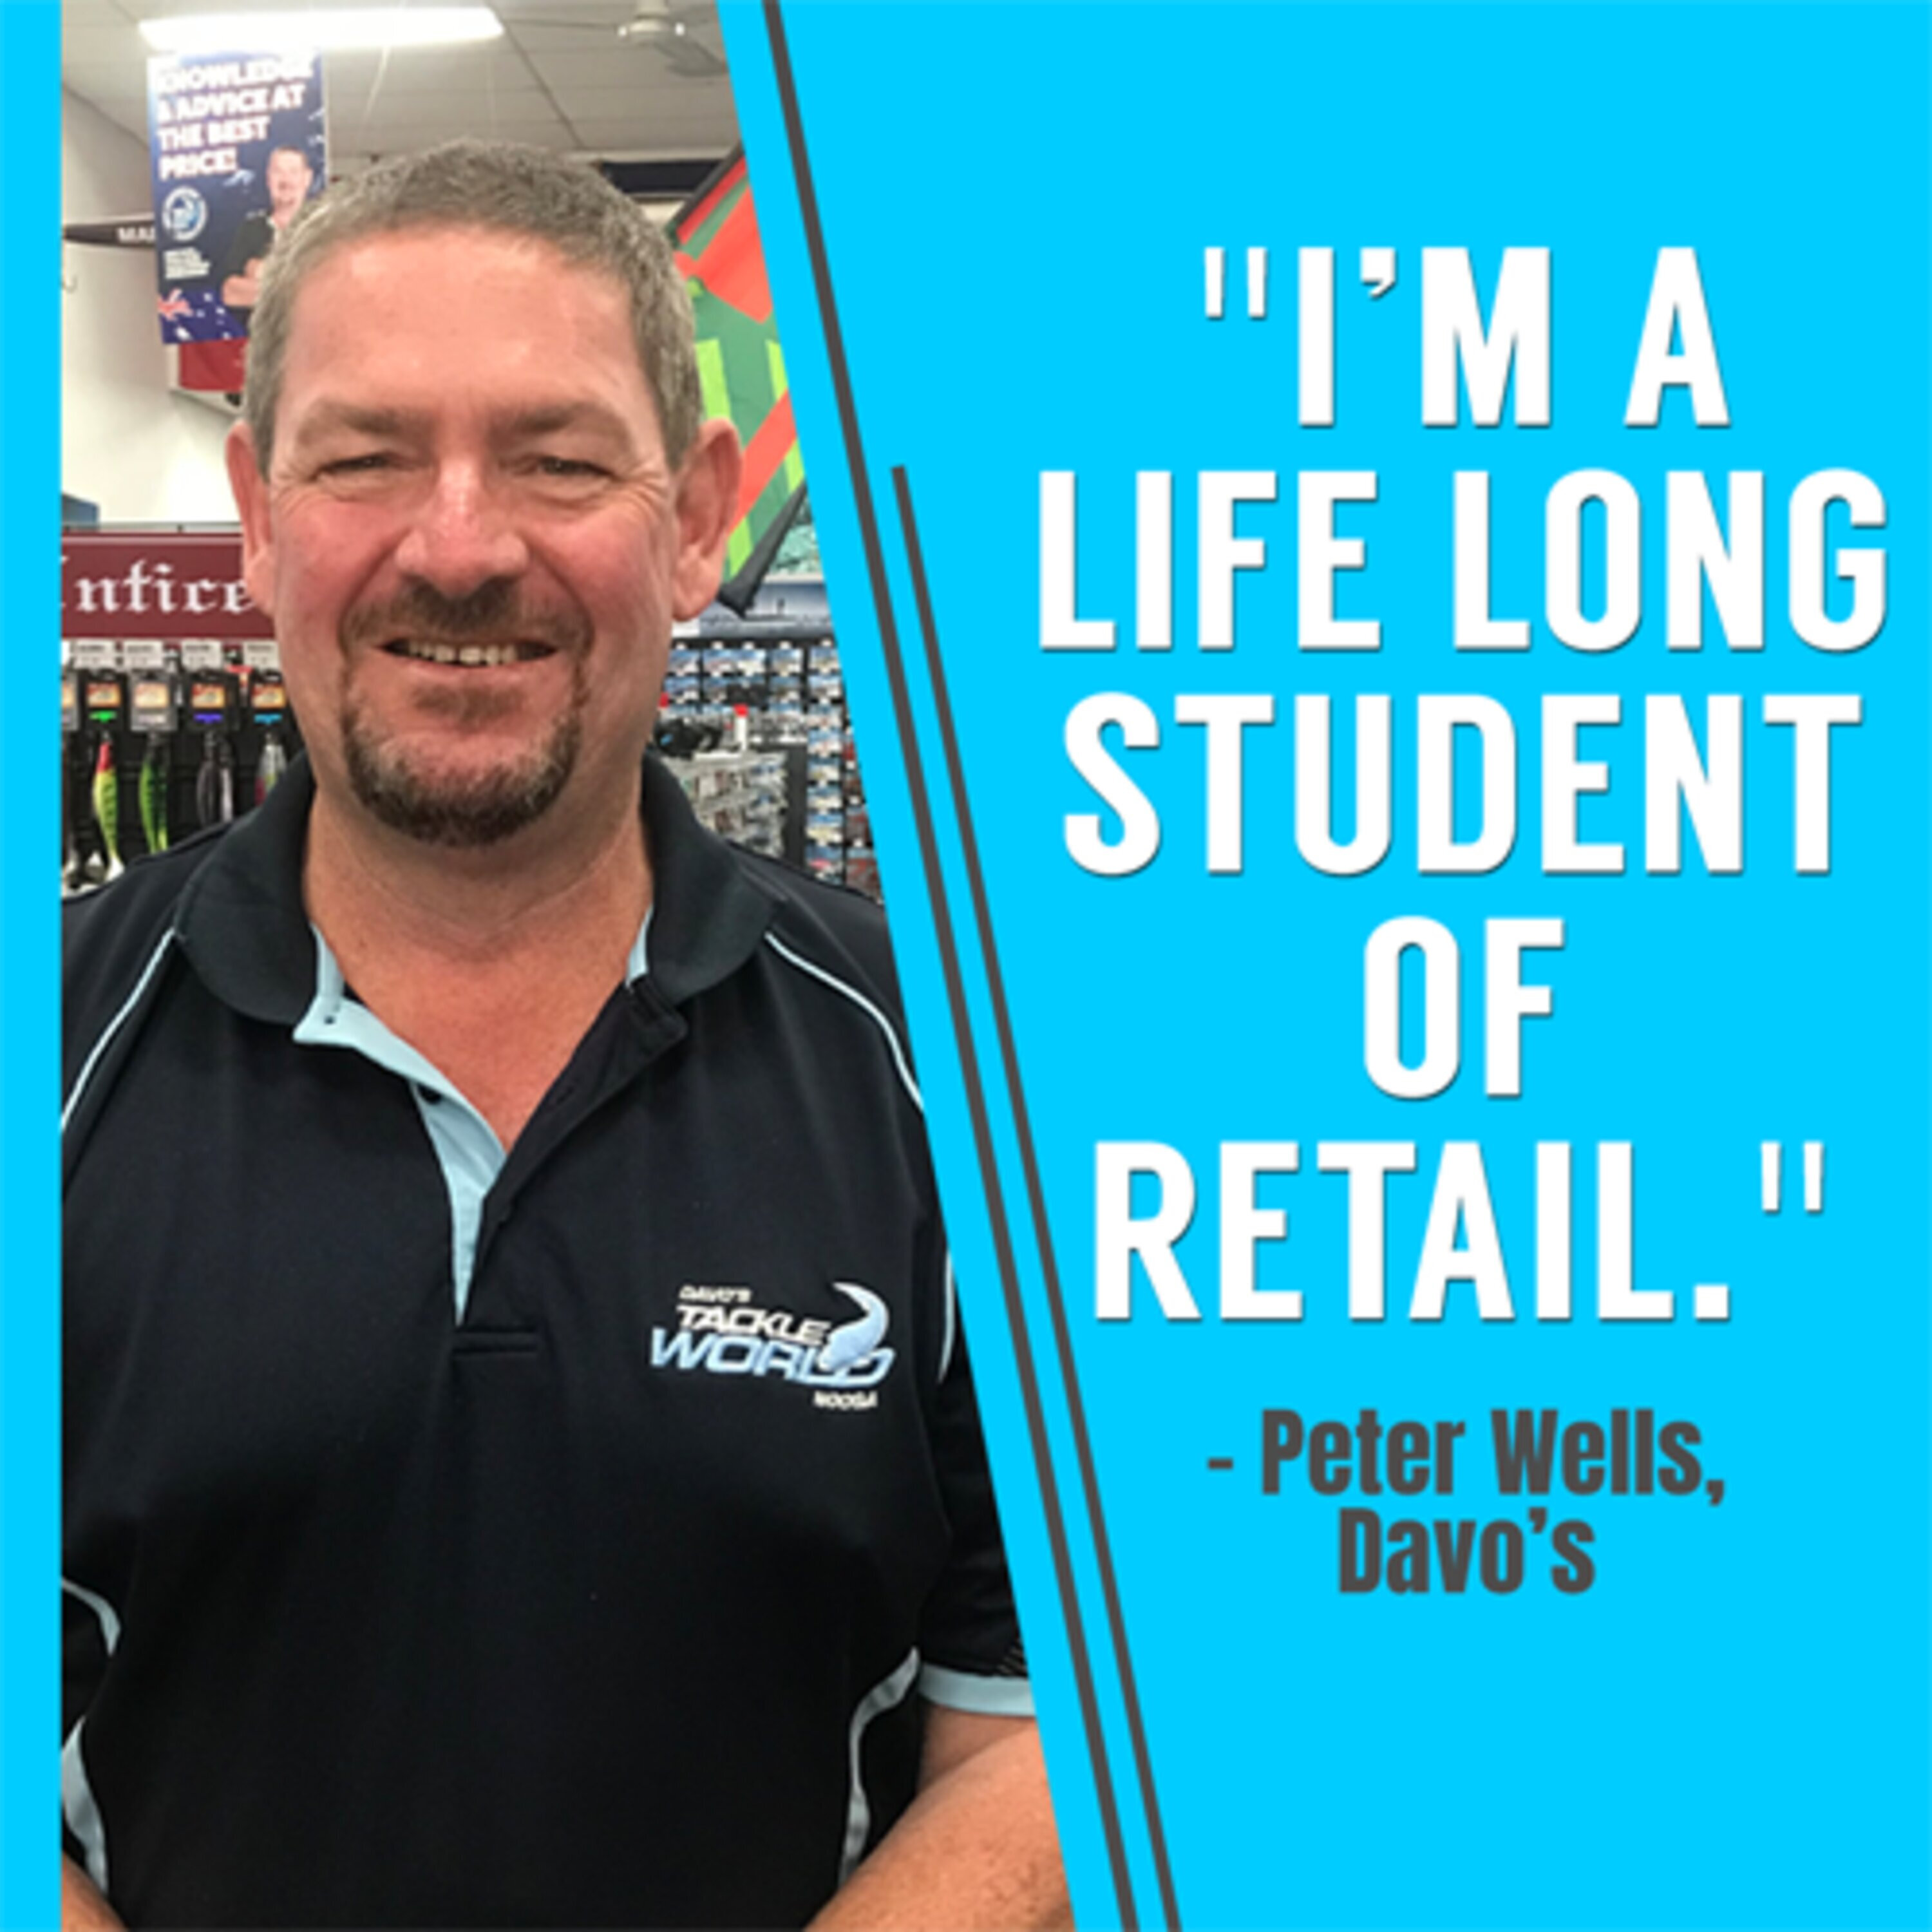 Sub-mariner now retailer Peter Wells on building an iconic local business | #440